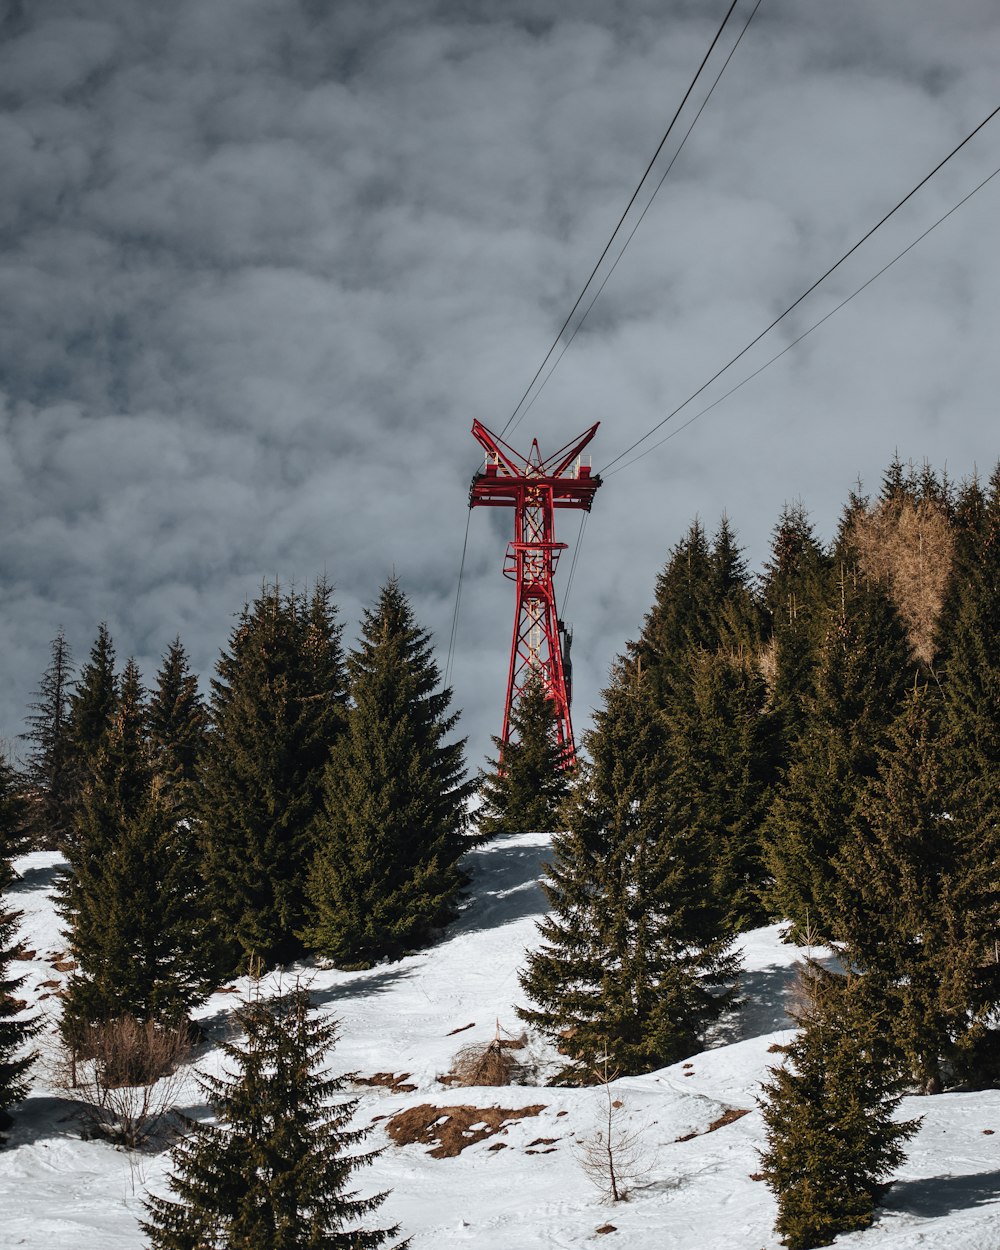 red and white cable car over snow covered ground